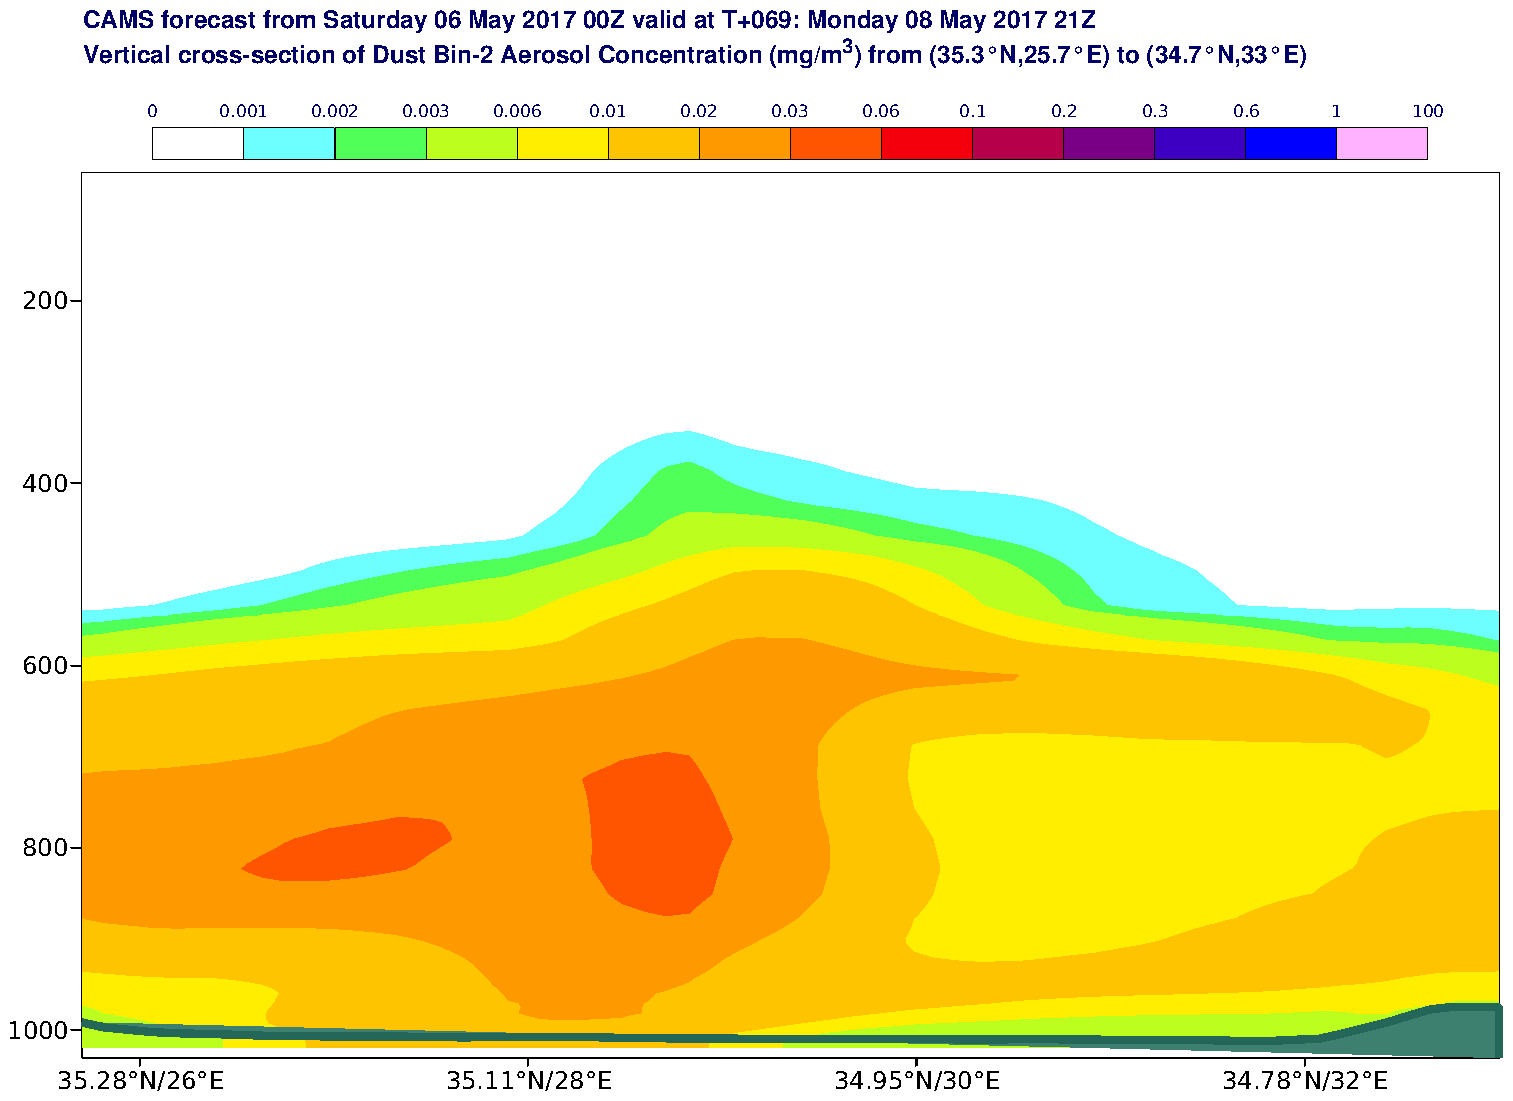 Vertical cross-section of Dust Bin-2 Aerosol Concentration (mg/m3) valid at T69 - 2017-05-08 21:00